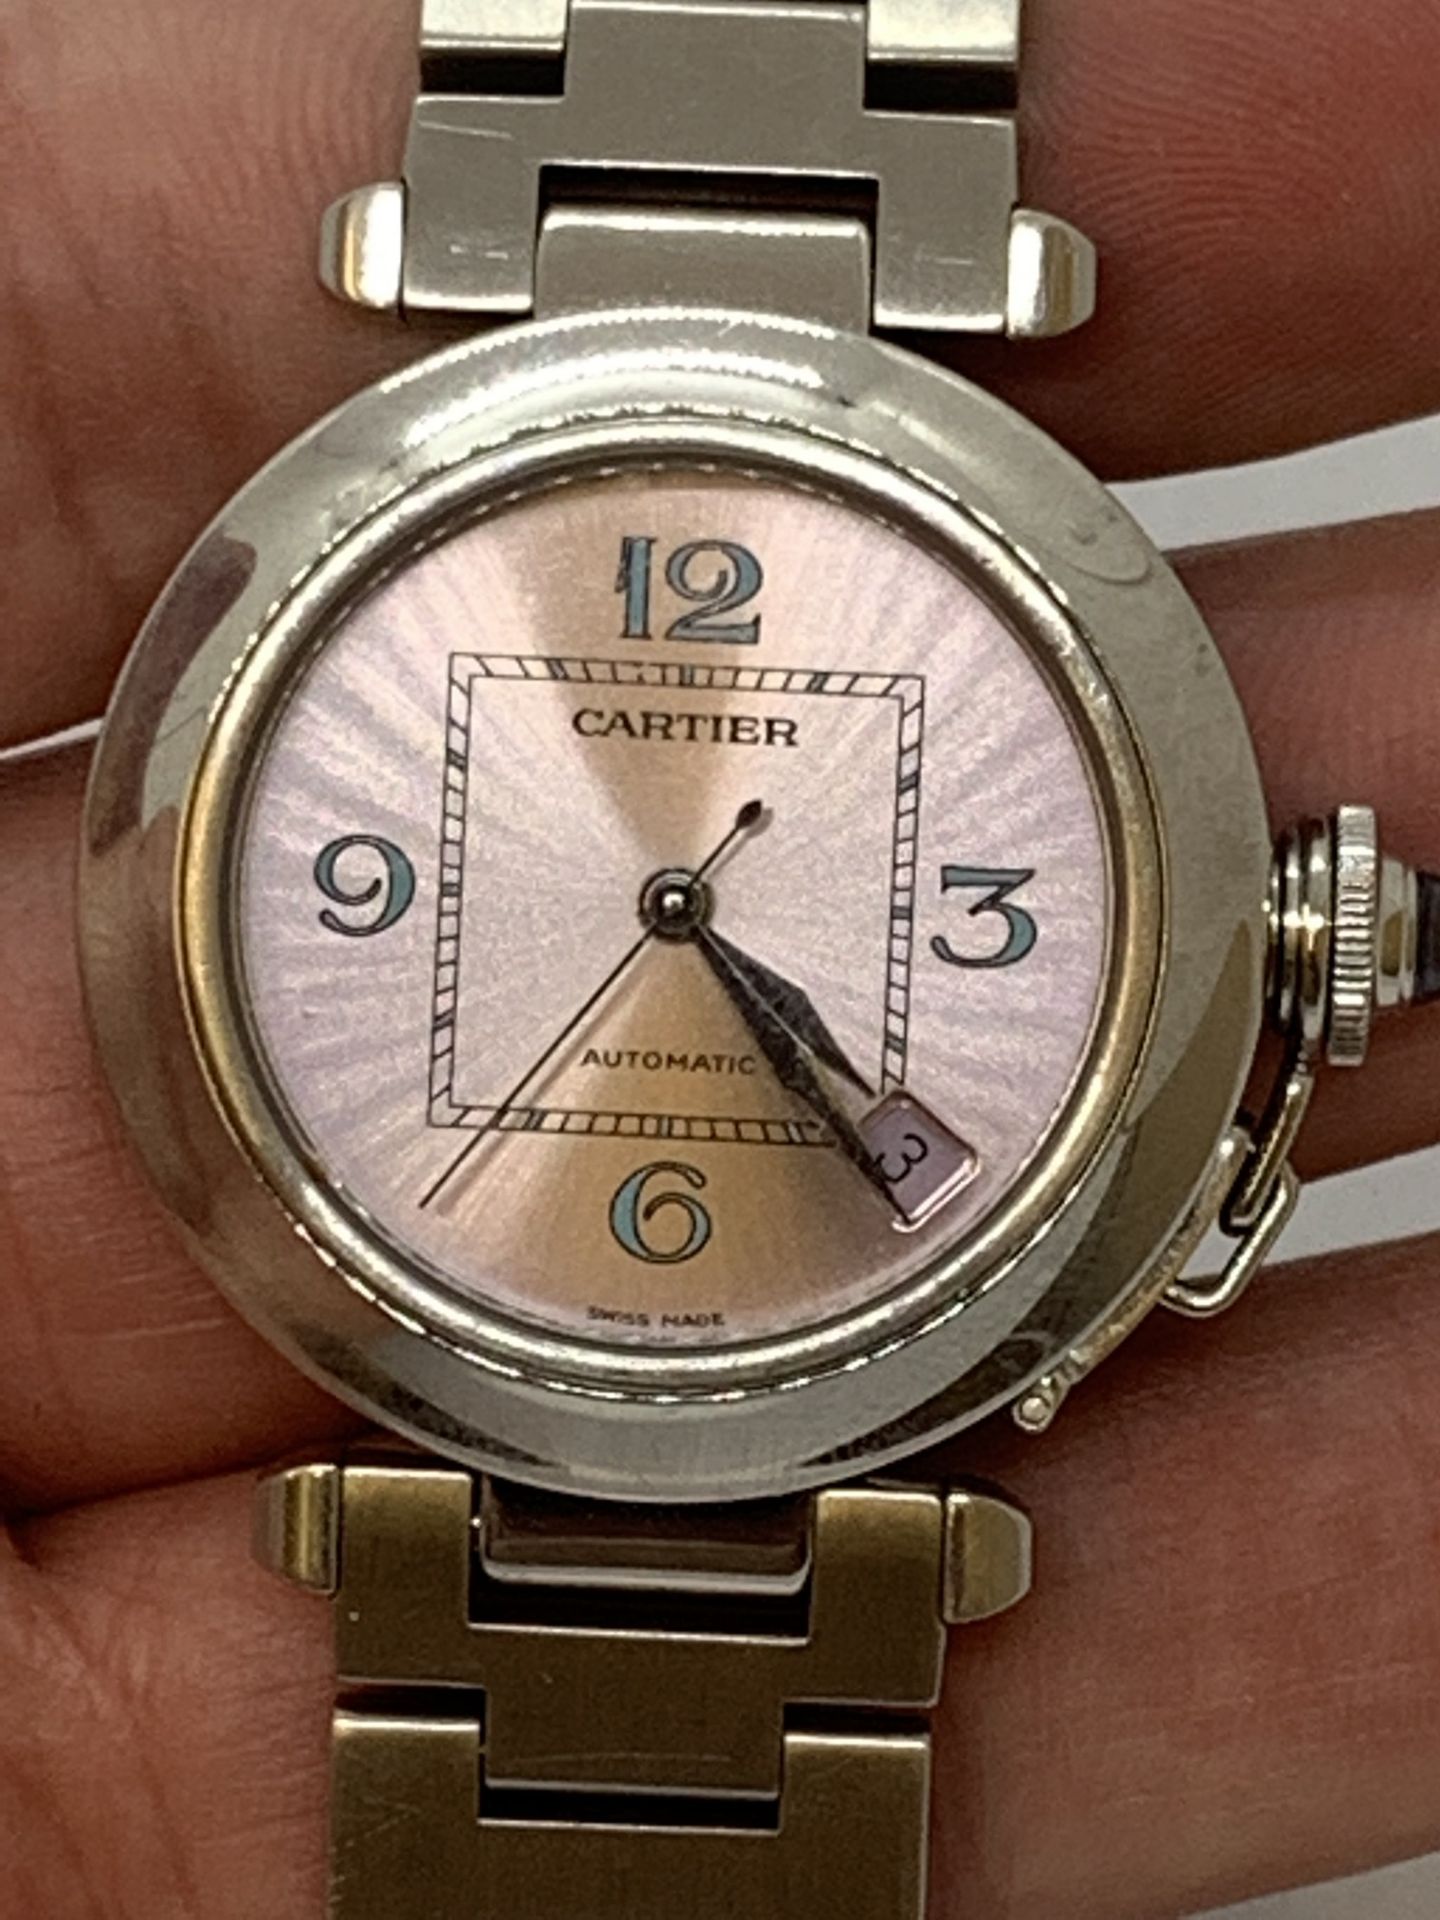 CARTIER PASHA S/S AUTOMATIC WATCH - Image 2 of 8